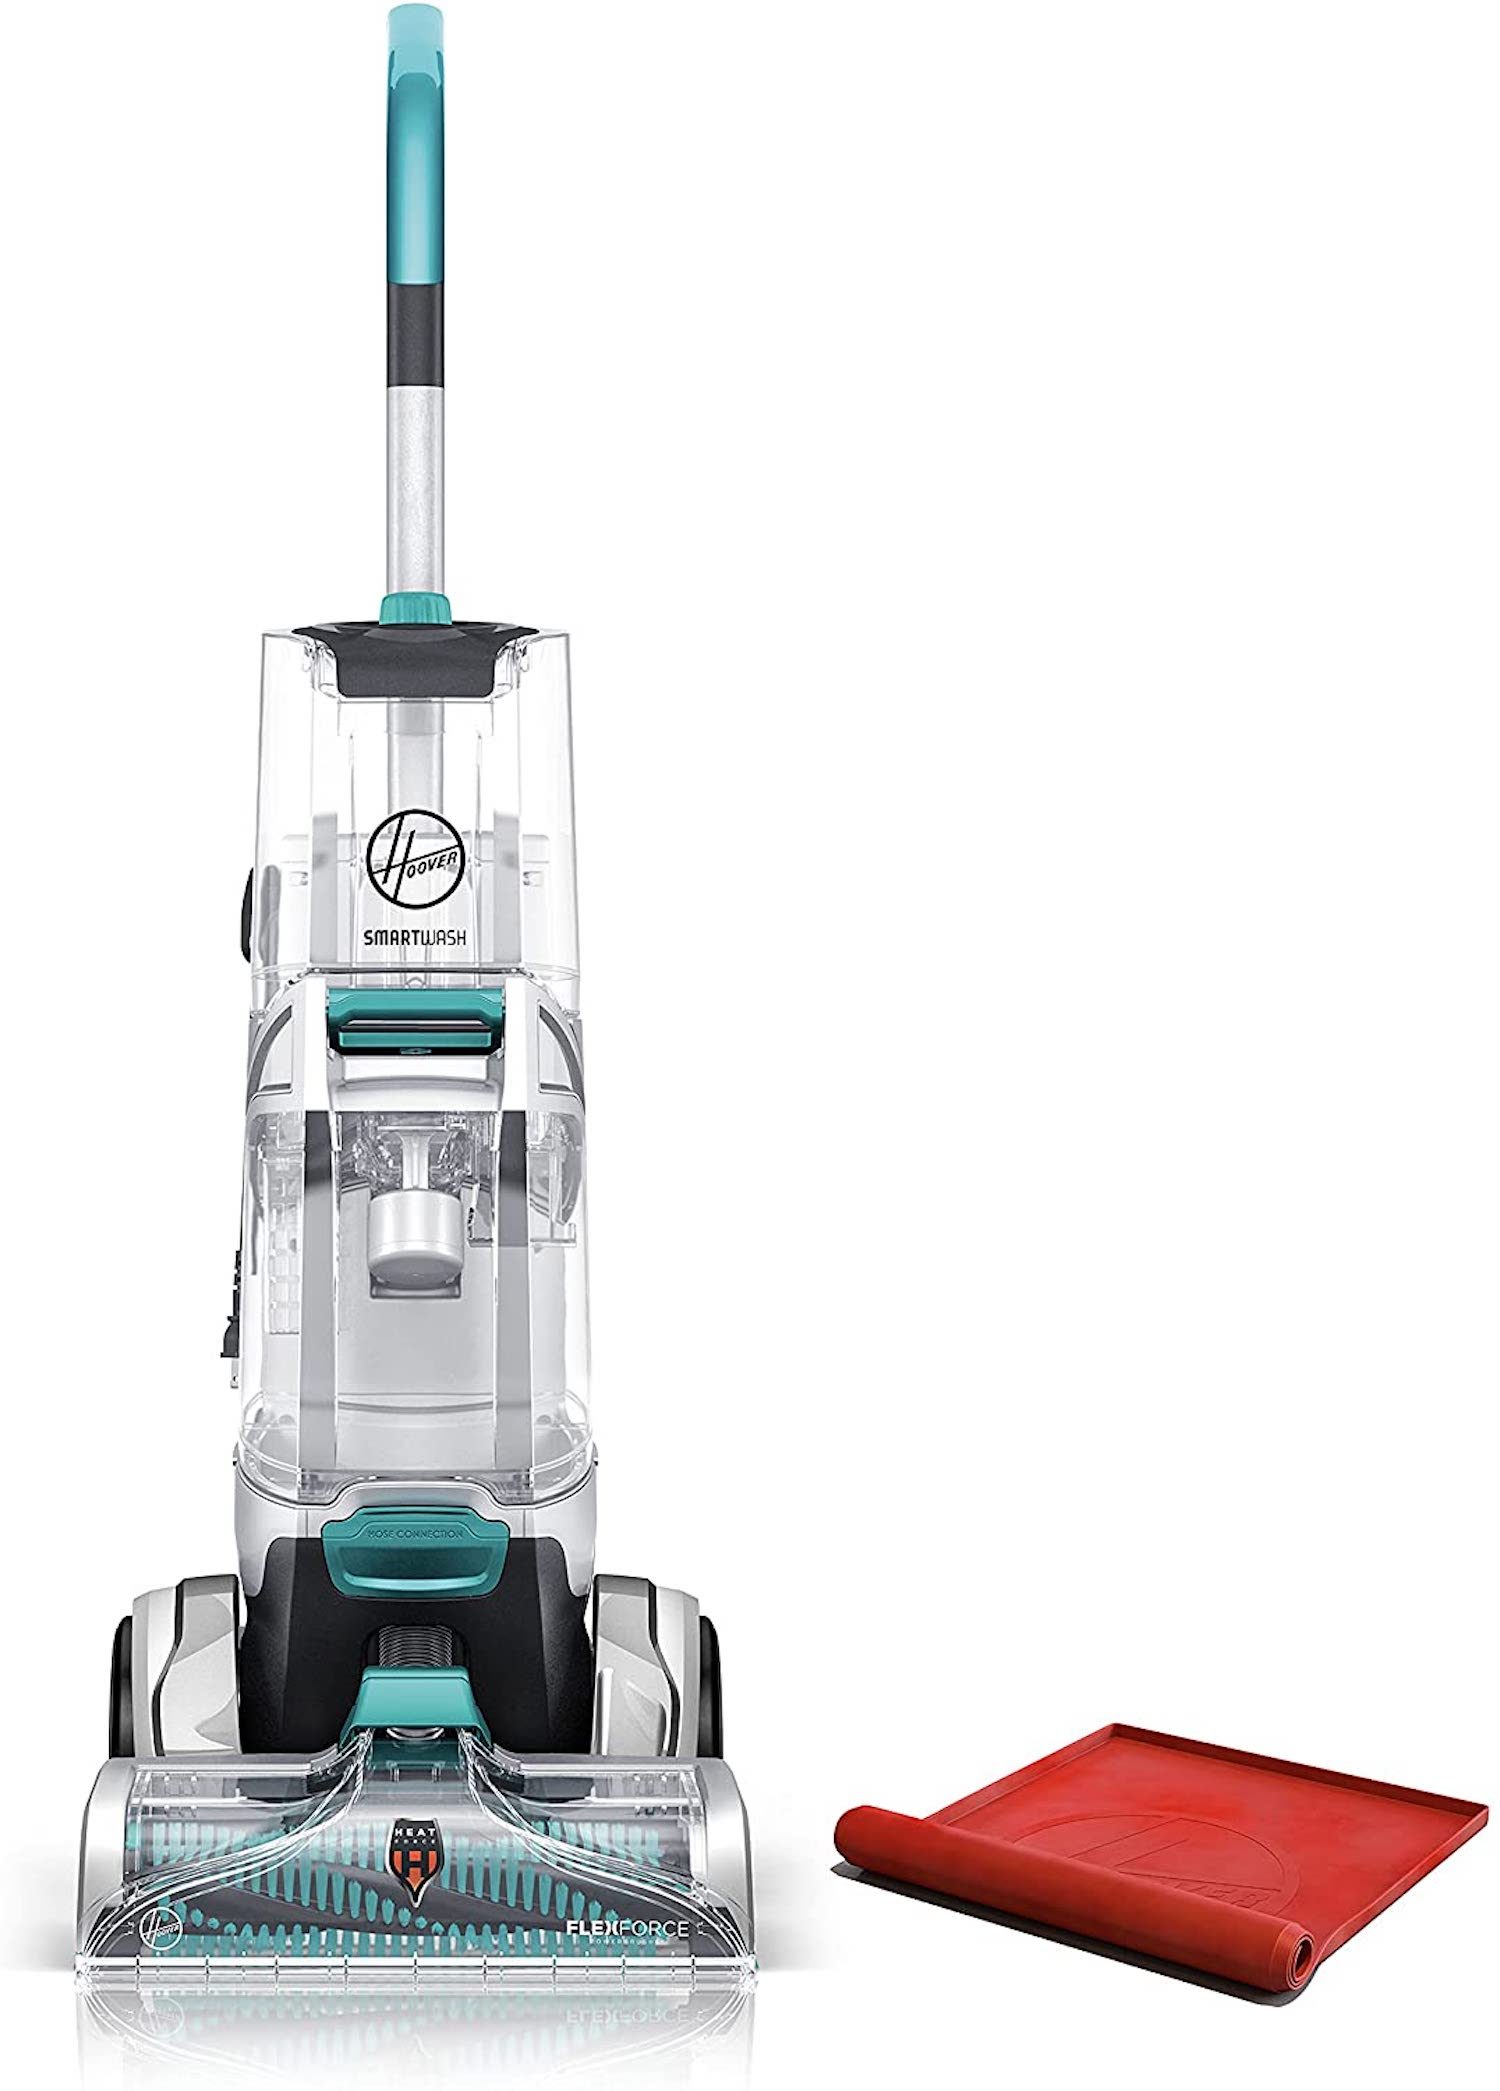 Save $90 on This Best-Selling Hoover Carpet Cleaner at